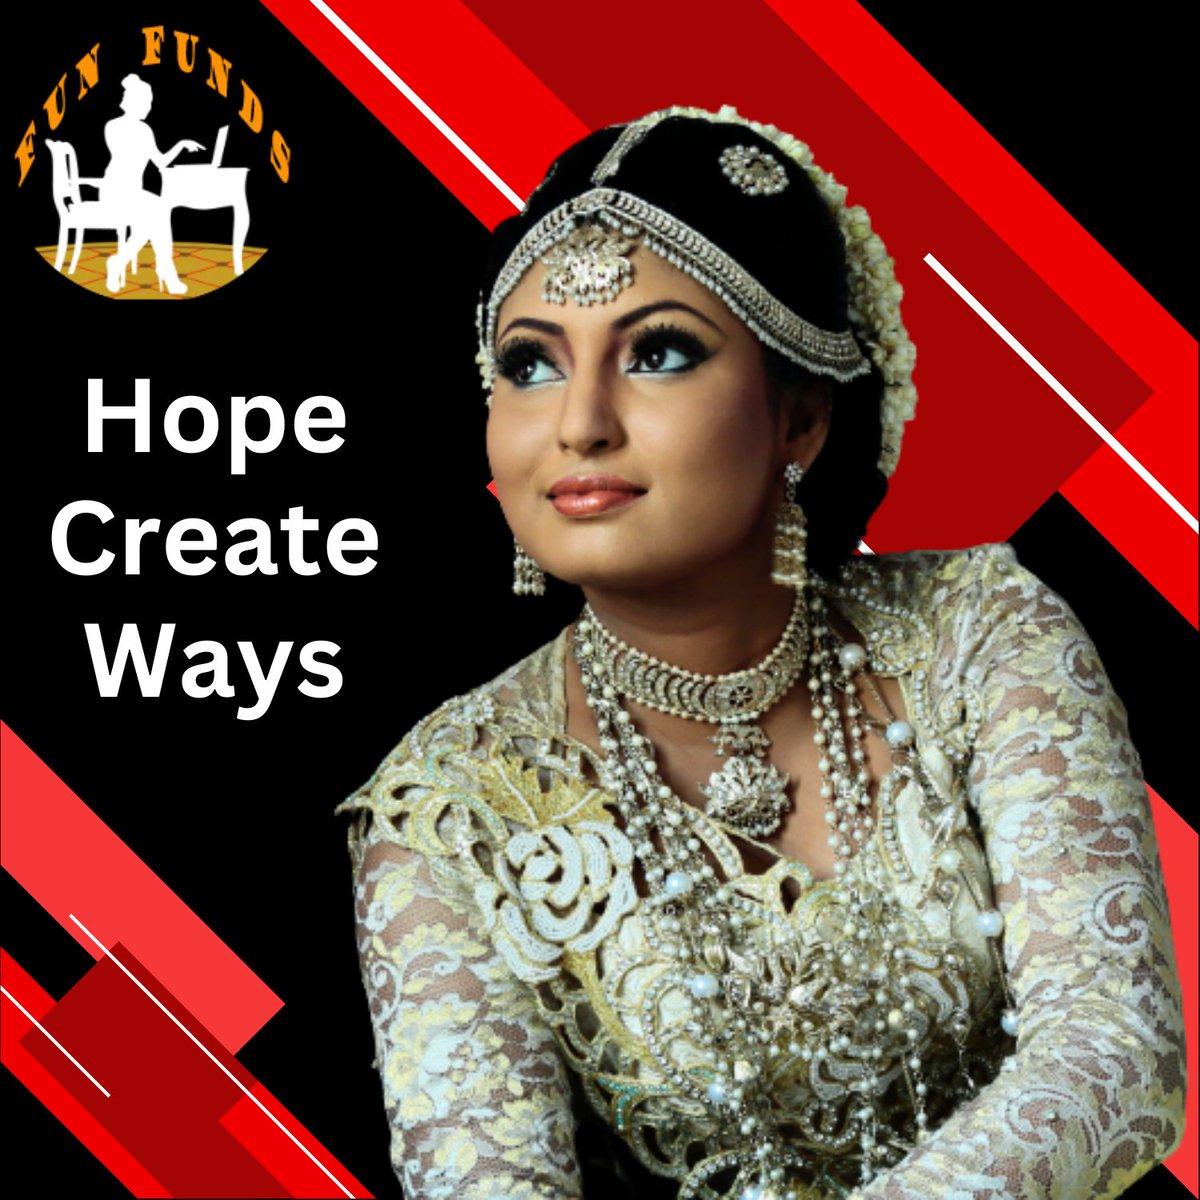 Hopeful people search for ways, gain knowledge and move forward to achieve success.
Opportunities are on your way, know and take steps forward.

mastpaisa.blogspot.com/p/introduction…

#mastpaisa #funfunds
#Hope #hopeful #HopeForAll #gainknowledge #achievesuccess #takesteps #knowledge #success